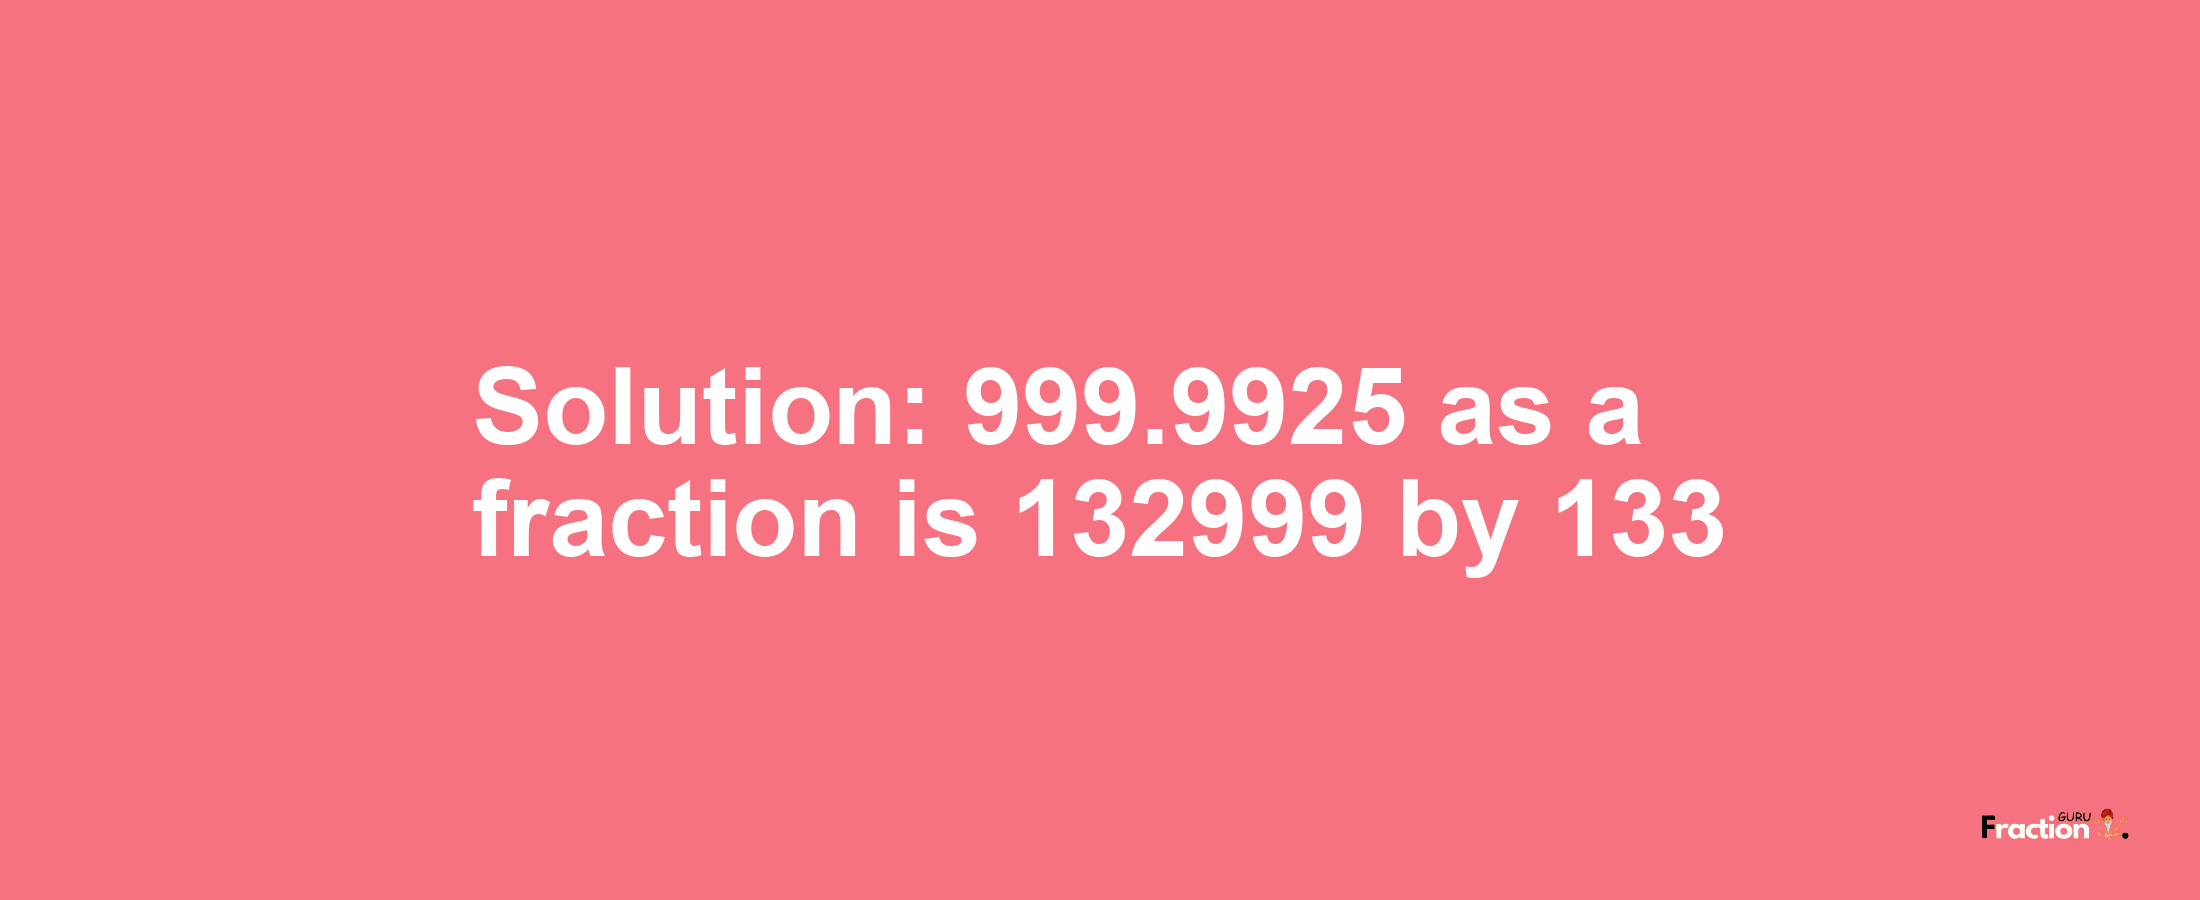 Solution:999.9925 as a fraction is 132999/133